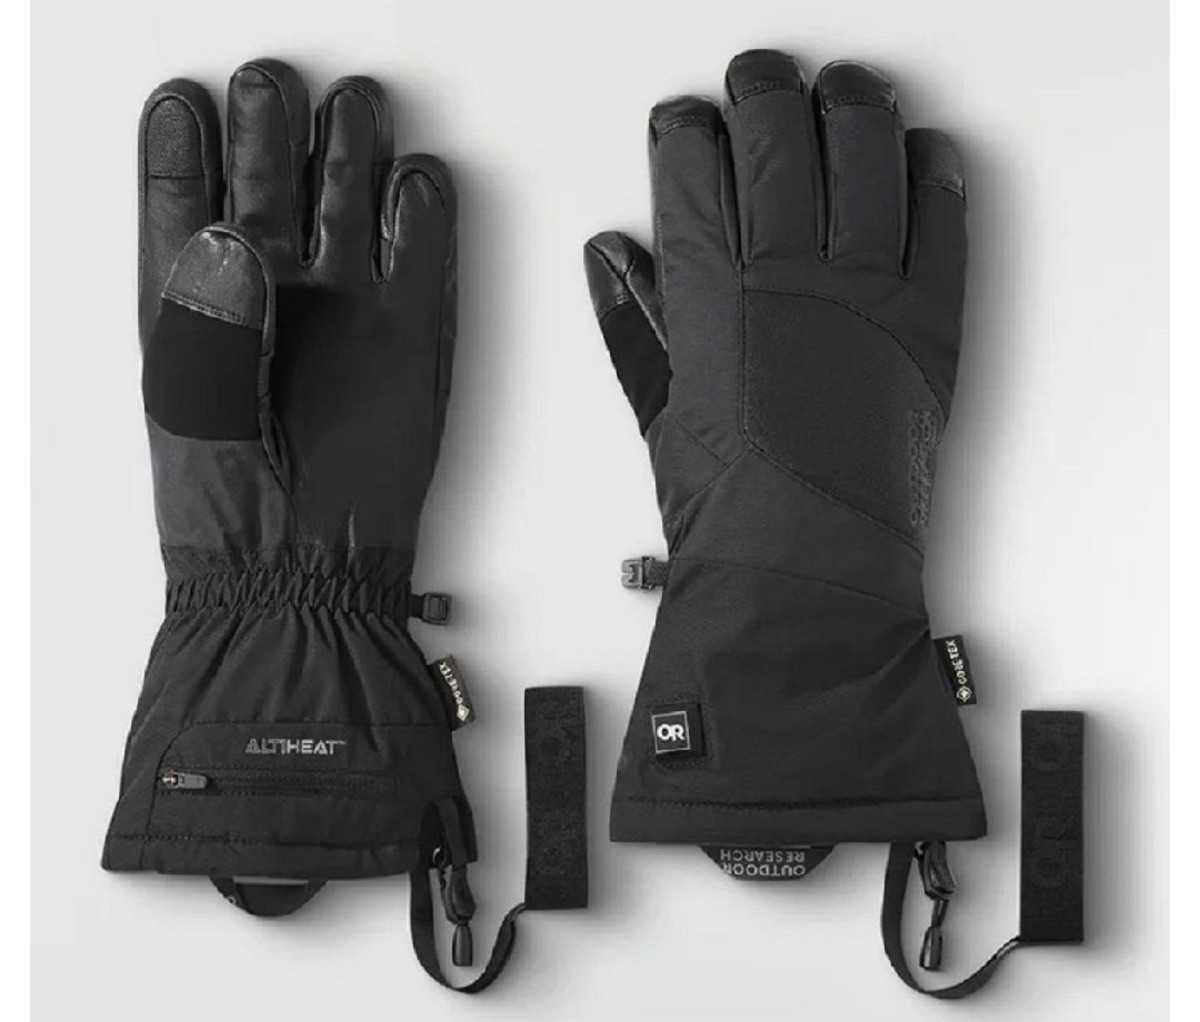 Outdoor Research Prevail heated gloves, black.